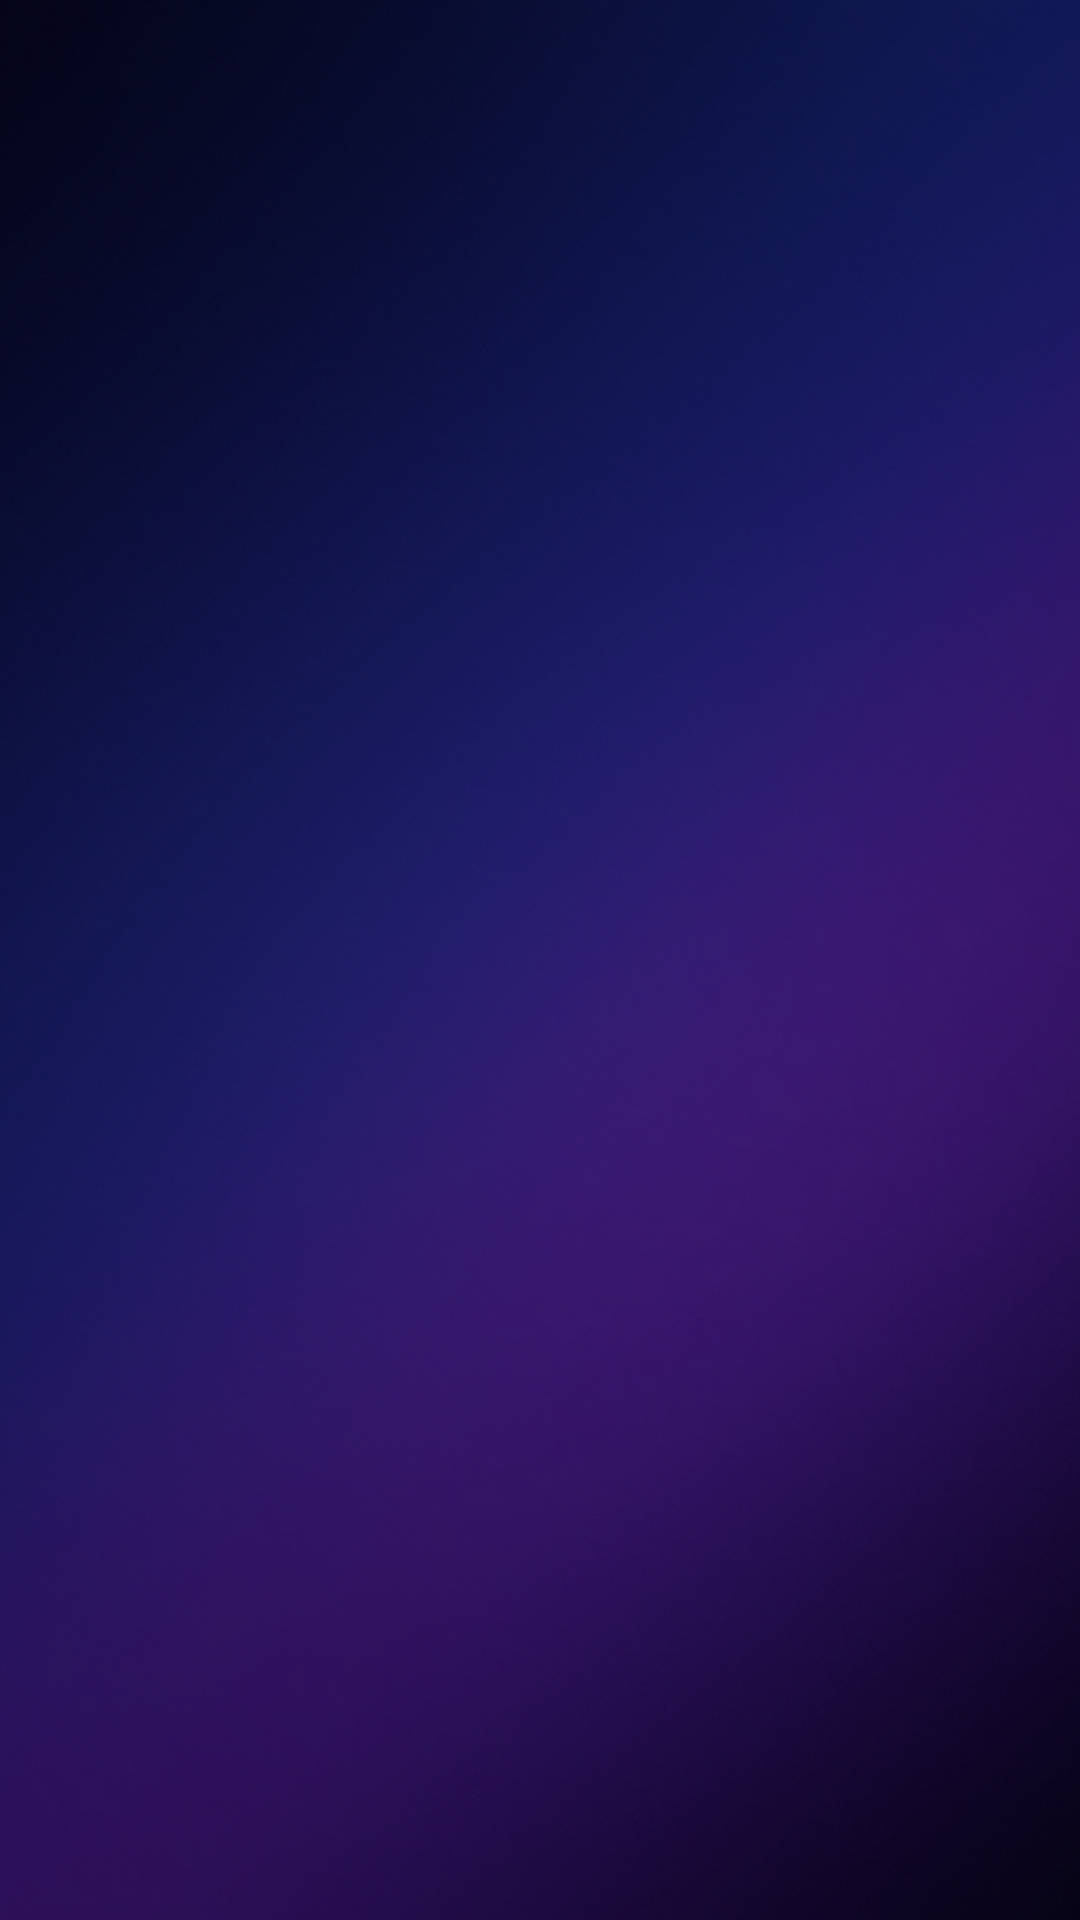 Blue And Violet Galaxy S10 Wallpaper